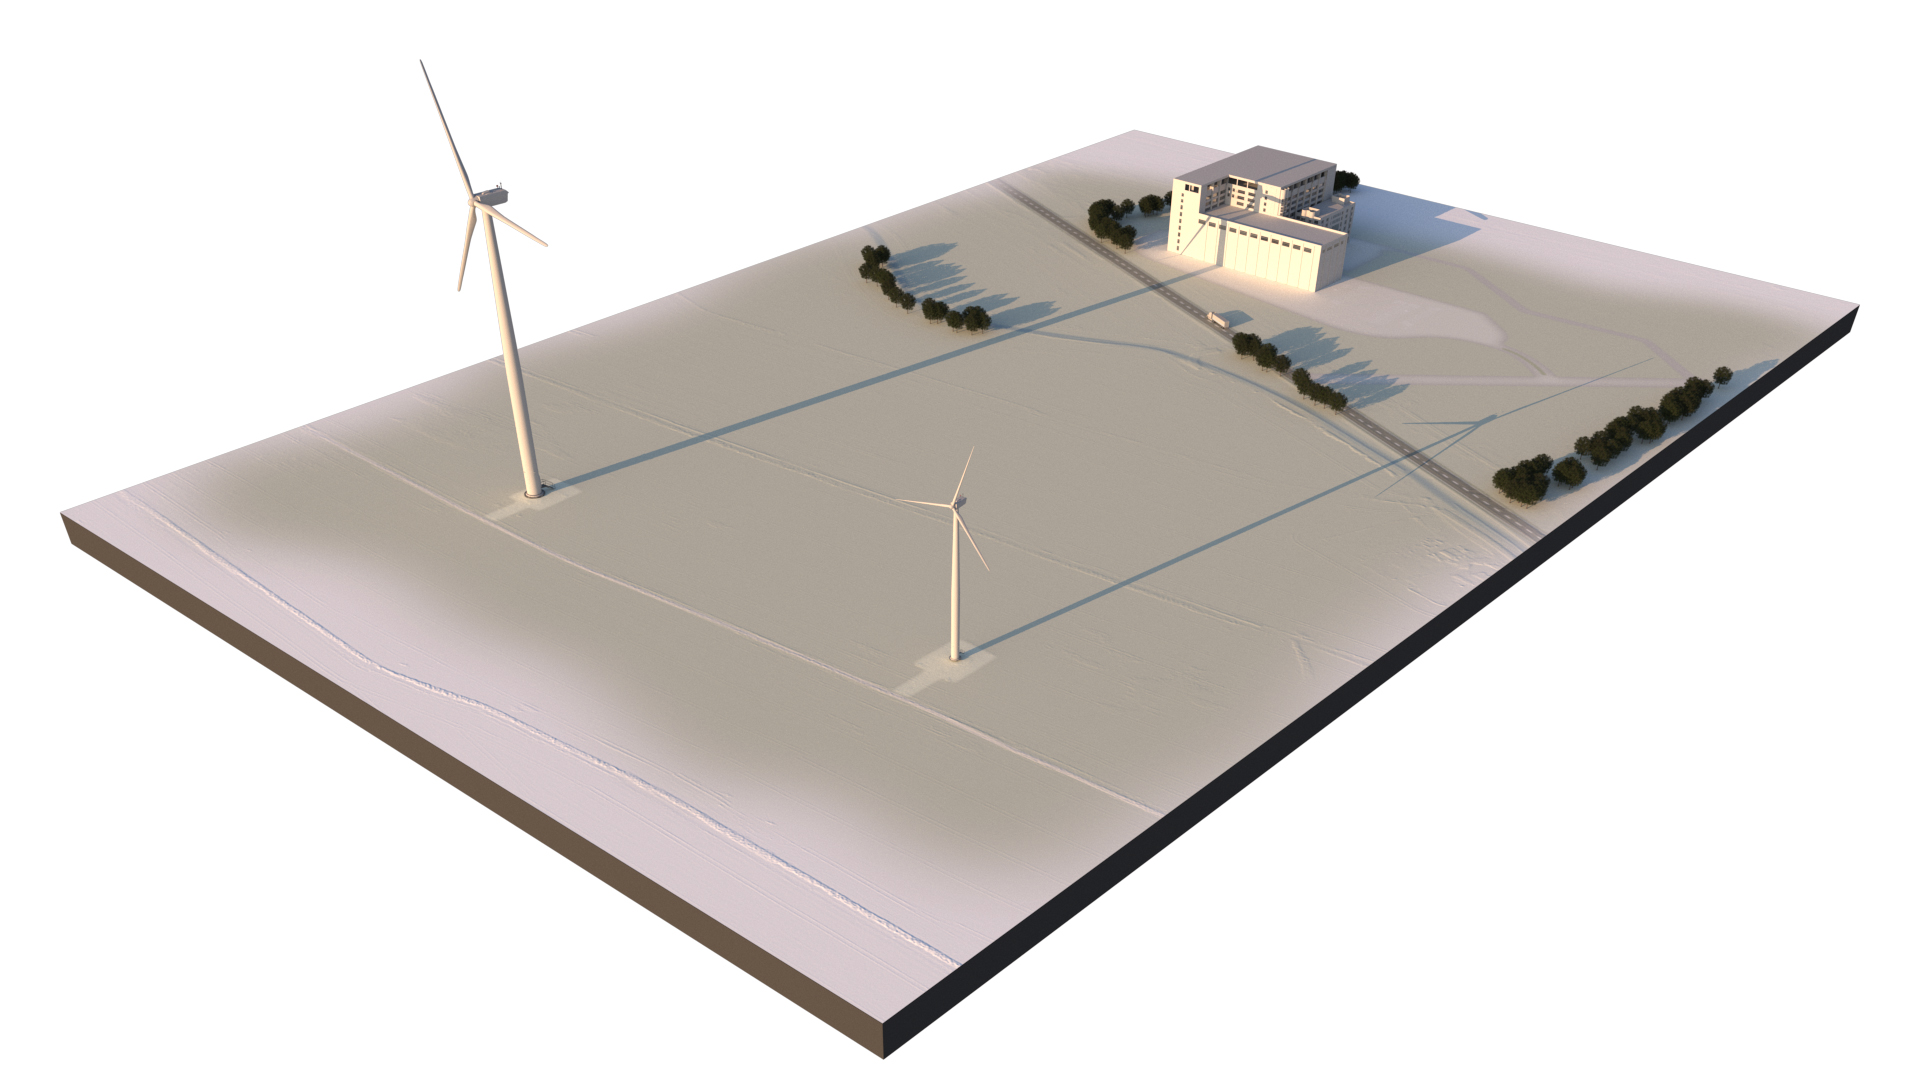 An illustration of both a tall and short wind turbine near a building. The tall turbine is casting a shadow on the building, while the short turbine does not